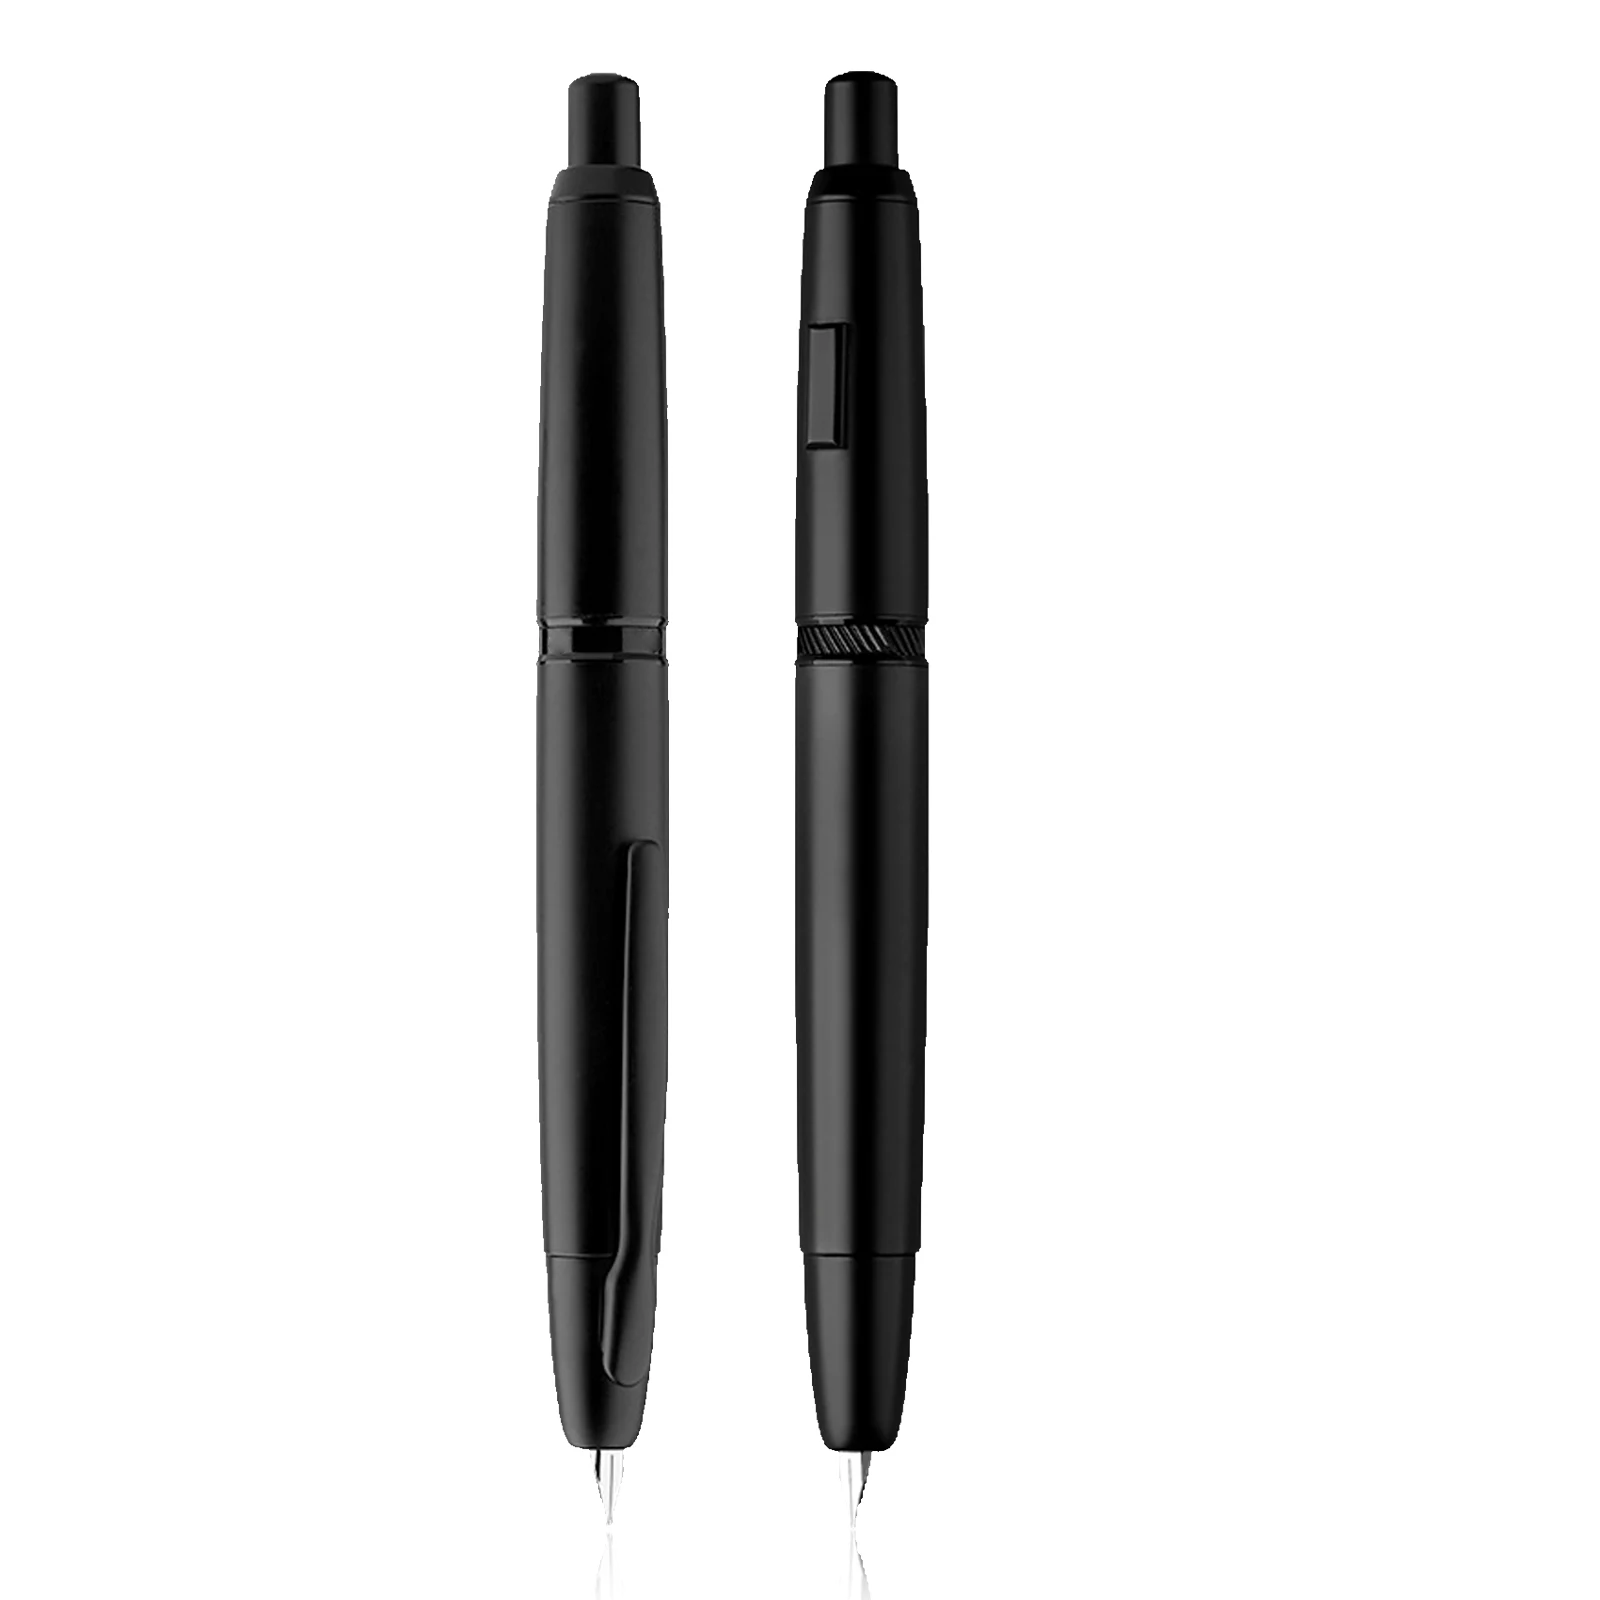 

in stock MAJOHN A1 Press Fountain Pen Retractable Extra Fine Nib 0.4mm Metal Matte Black Ink Pen with Converter for Writing